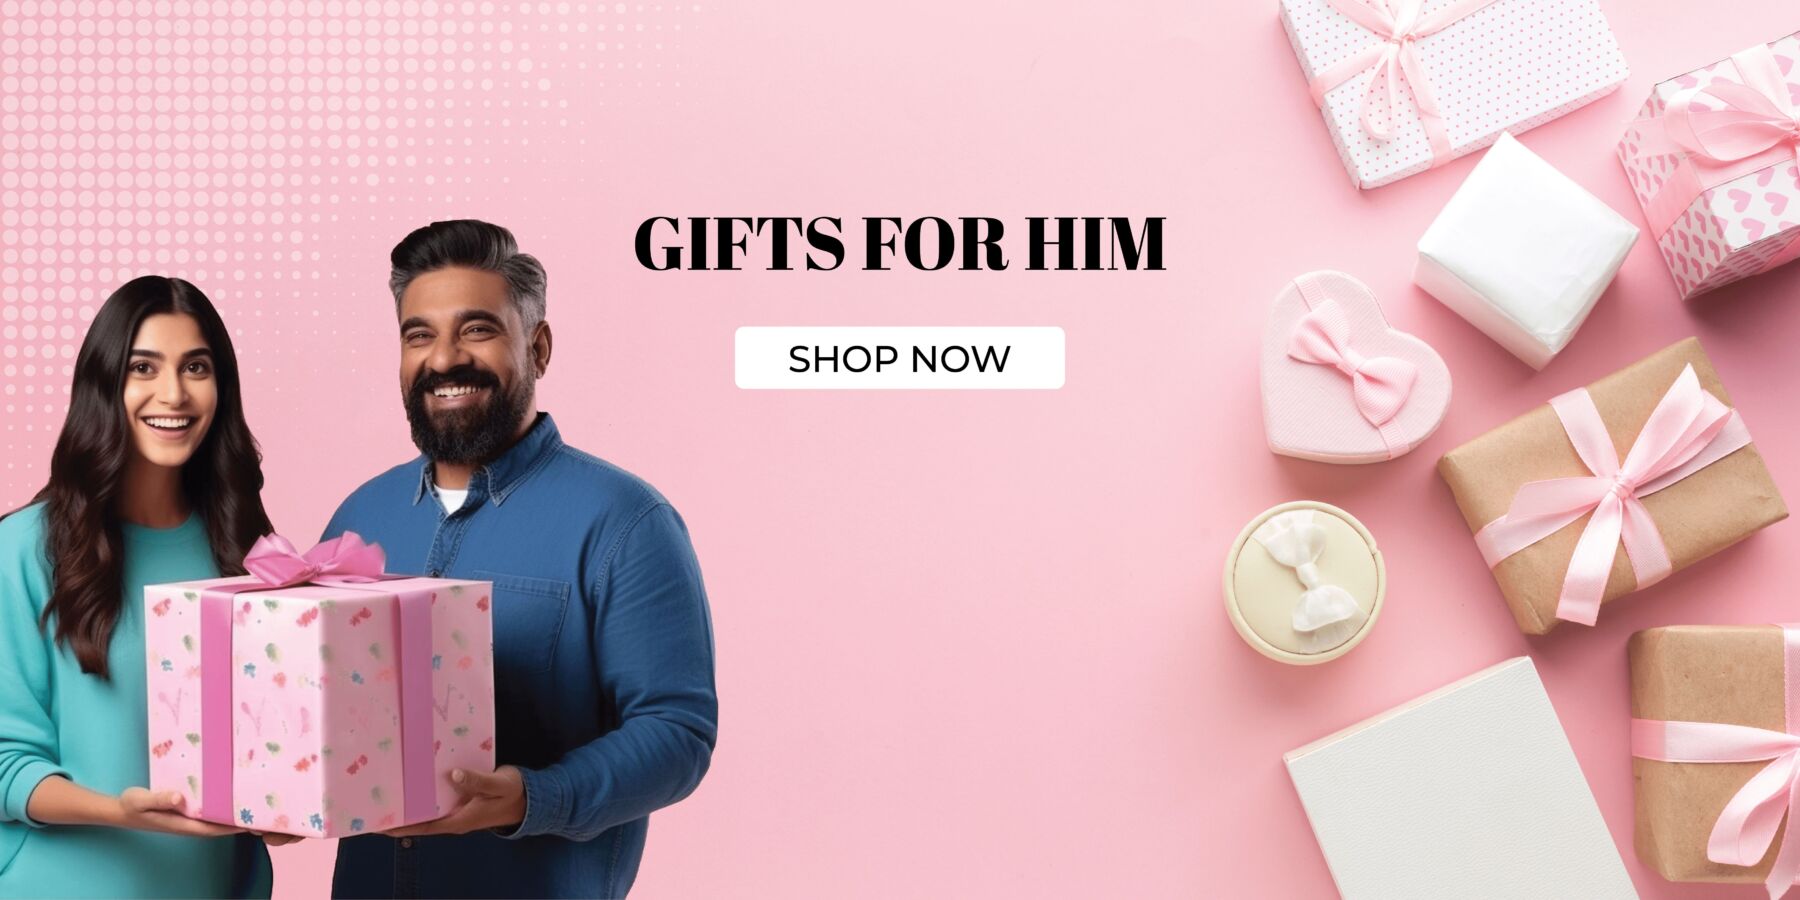 Gifts For him